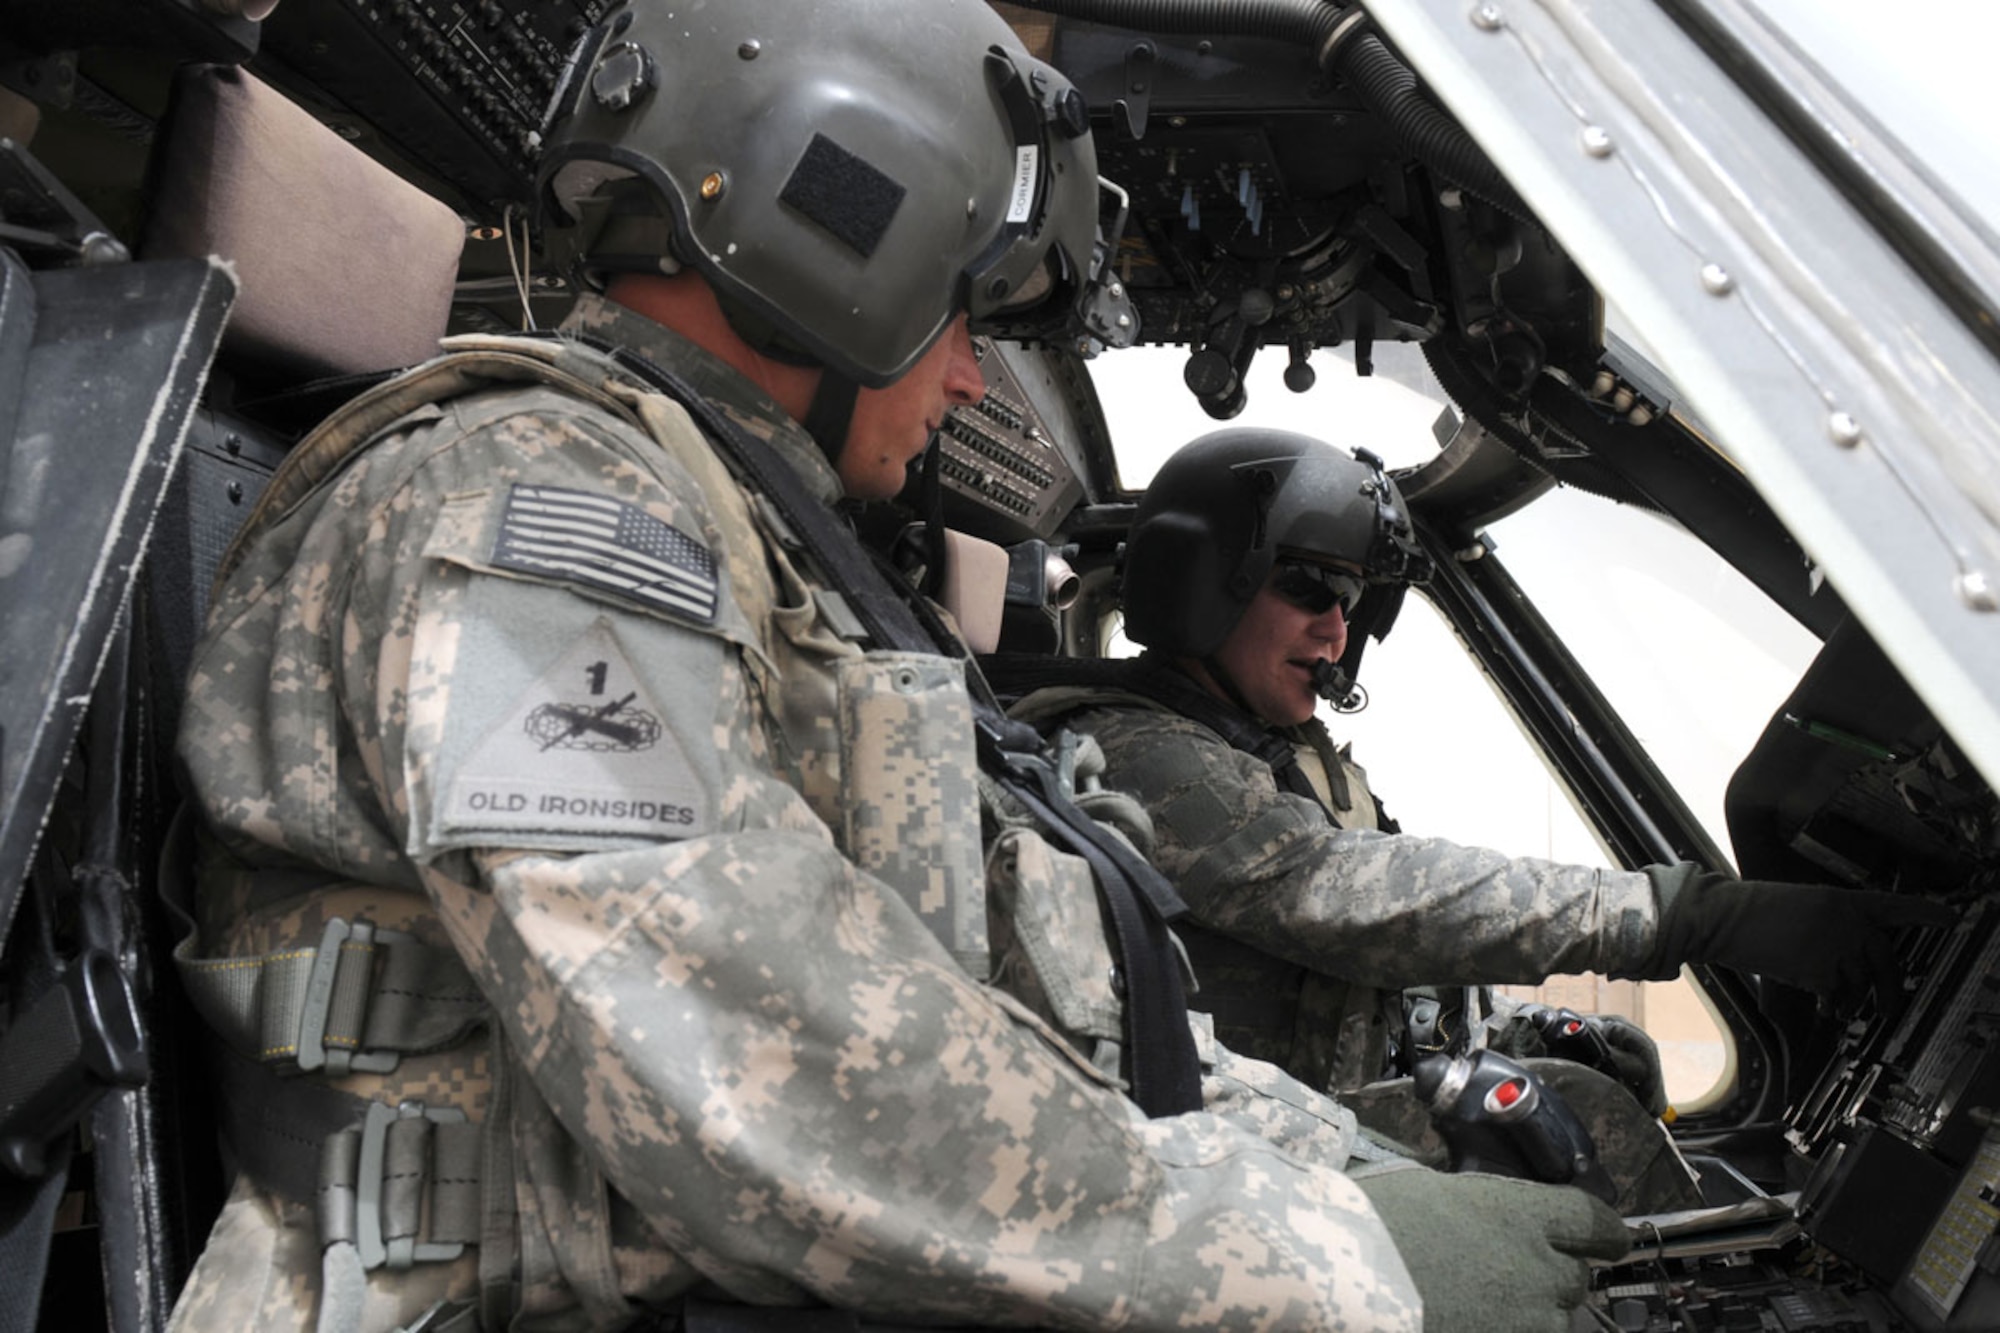 BAGHDAD, Iraq -- Chief Warrant Officer 2 Joshua Cormier (left), aviator with B Company, 1st Battalion, 207th Aviation Regiment, and Capt. Todd R. Miller, aviator and company commander of B/1-207th Avn. perform flight checks on their UH-60 Black Hawk helicopter before a mission. (U.S. Army photo/Sgt. TJ Moller)